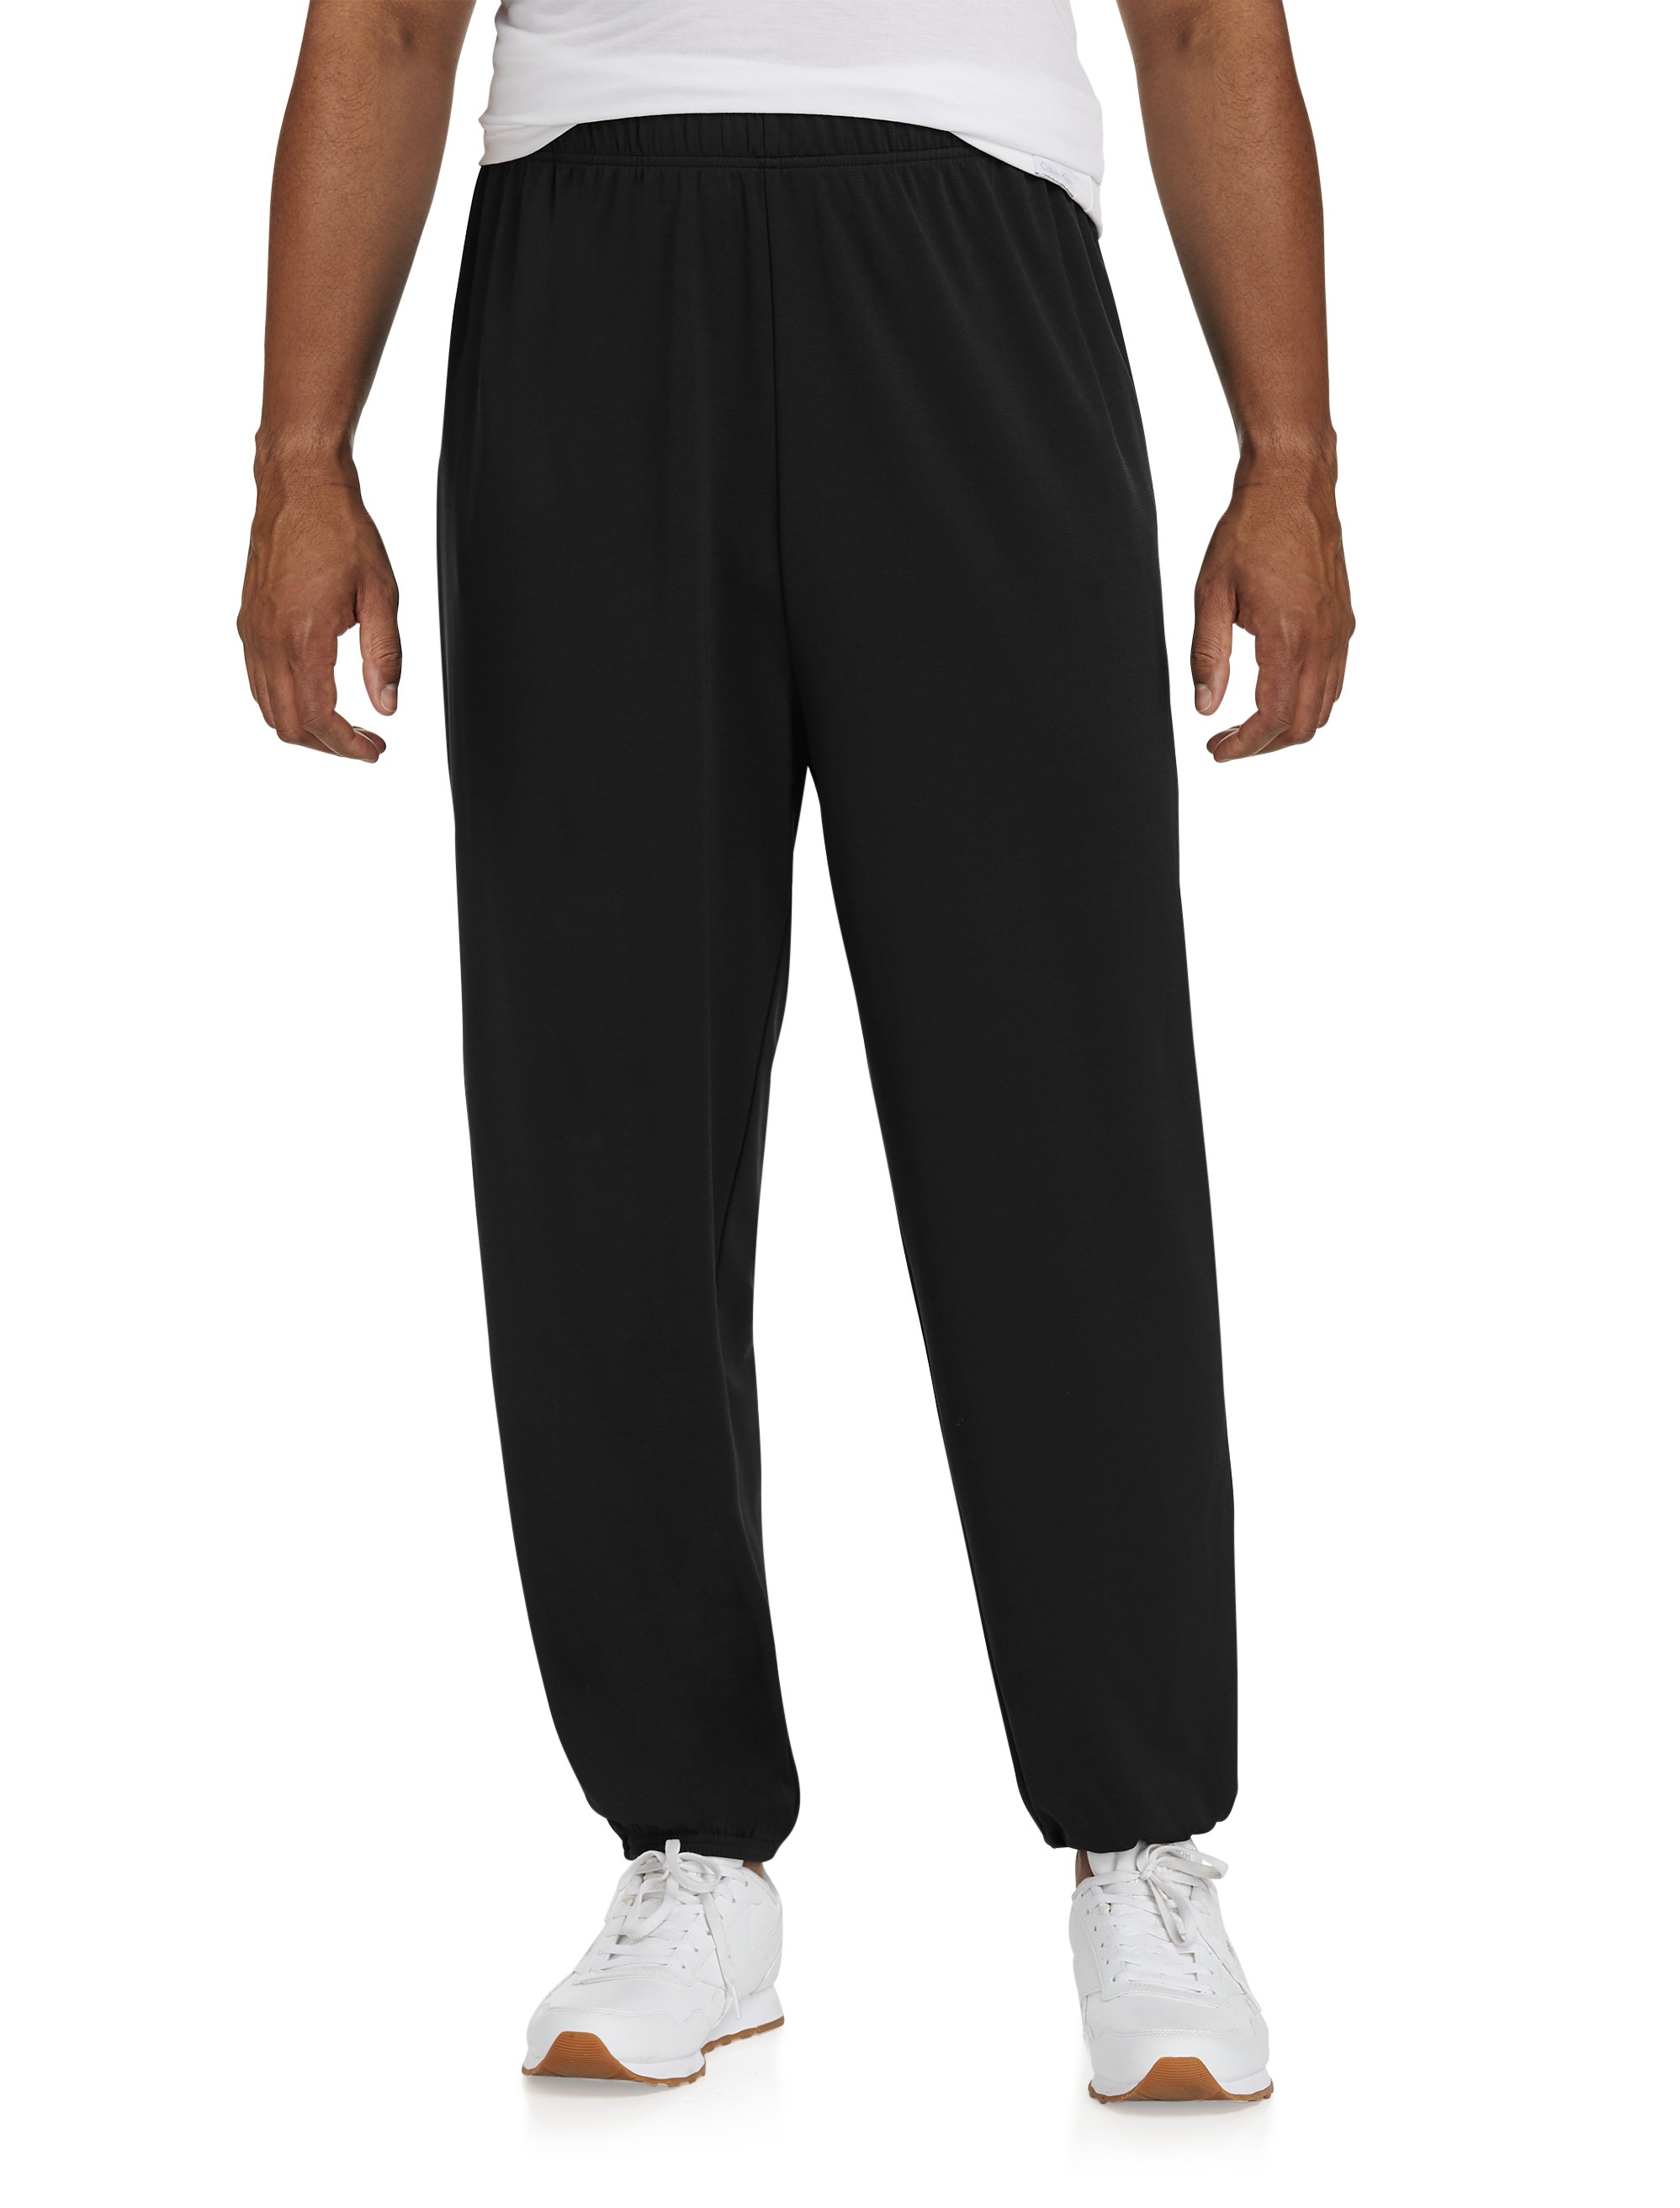 Big and Tall Workout Pants in Big and Tall Workout Clothing 